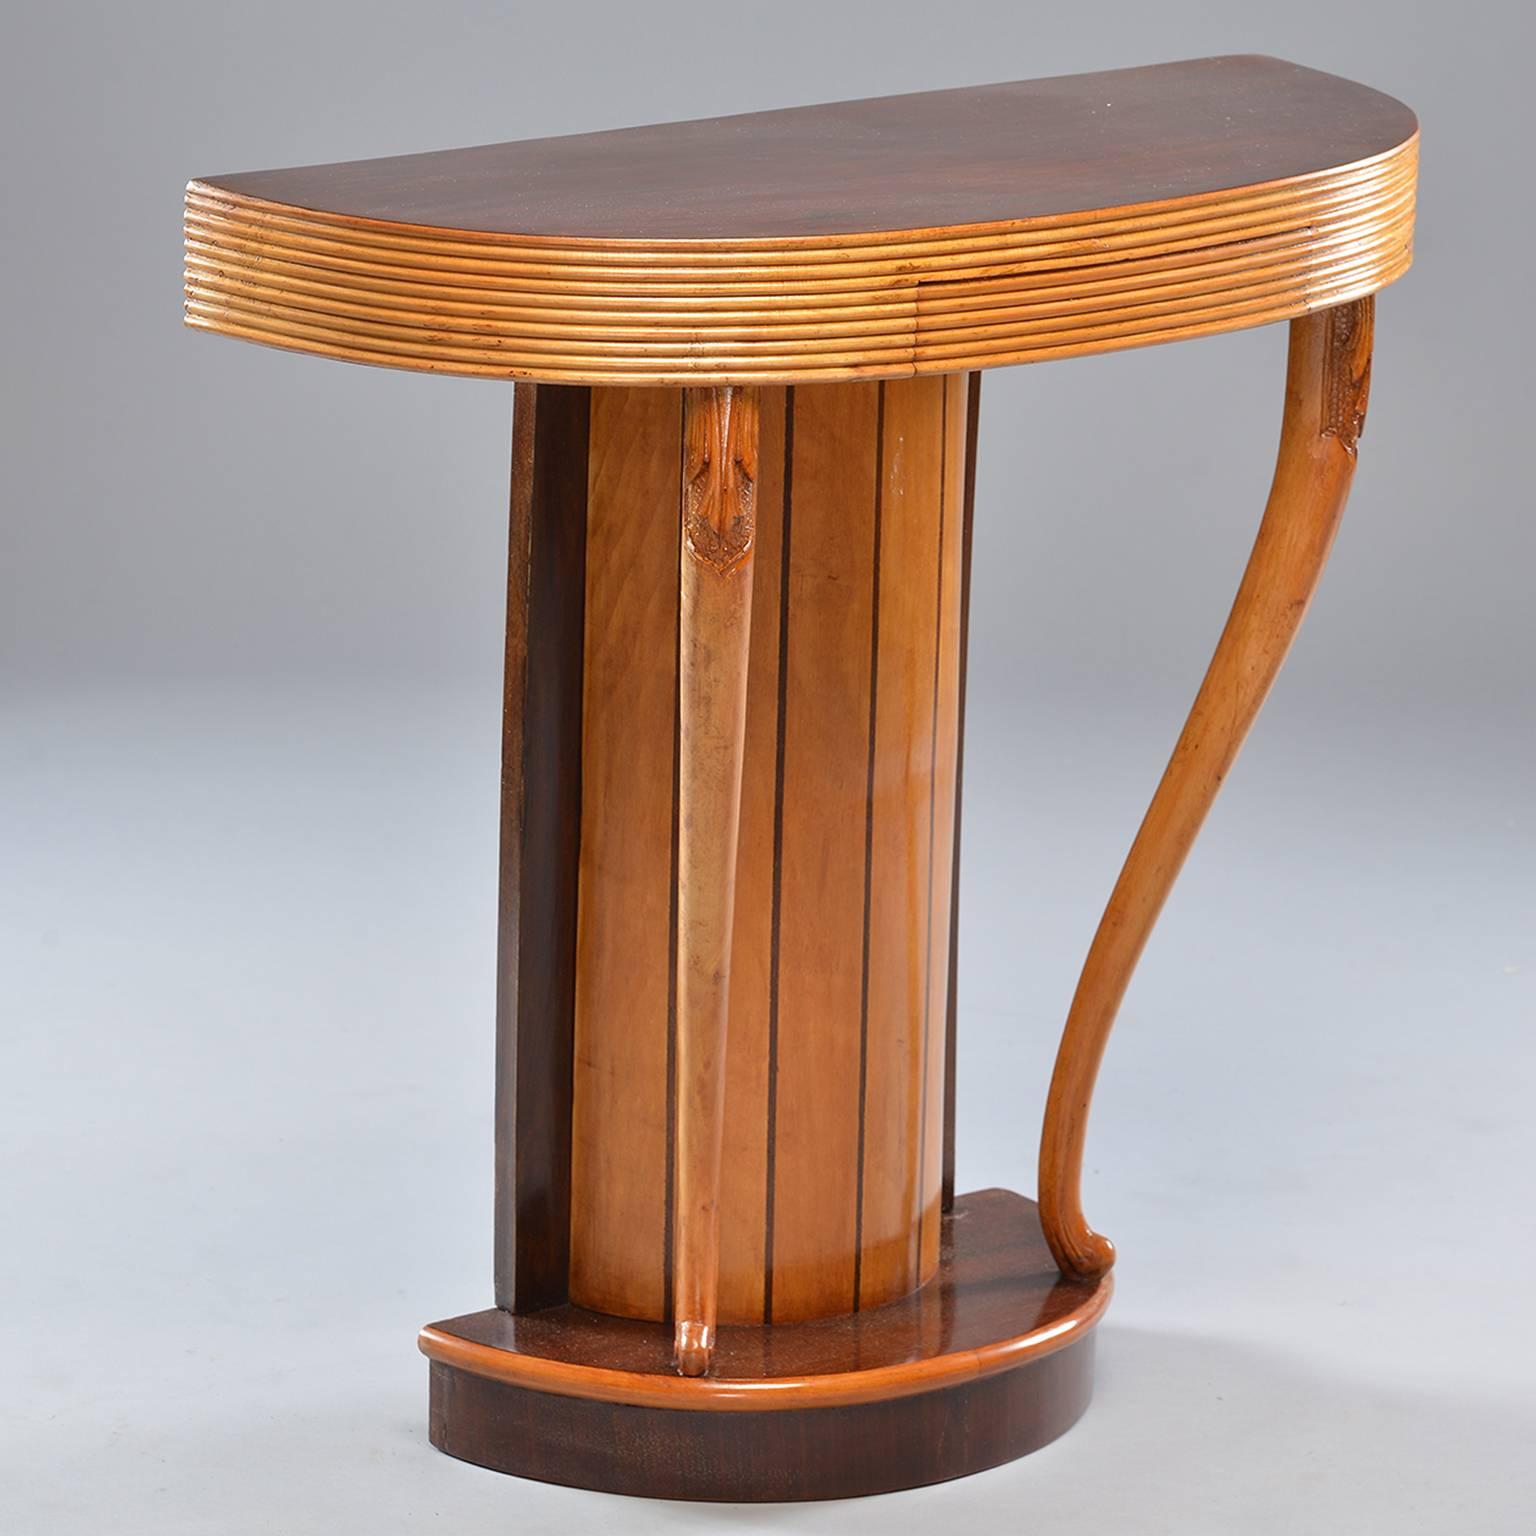 Carved Italian Art Deco Demilune Console with Reeded Edge